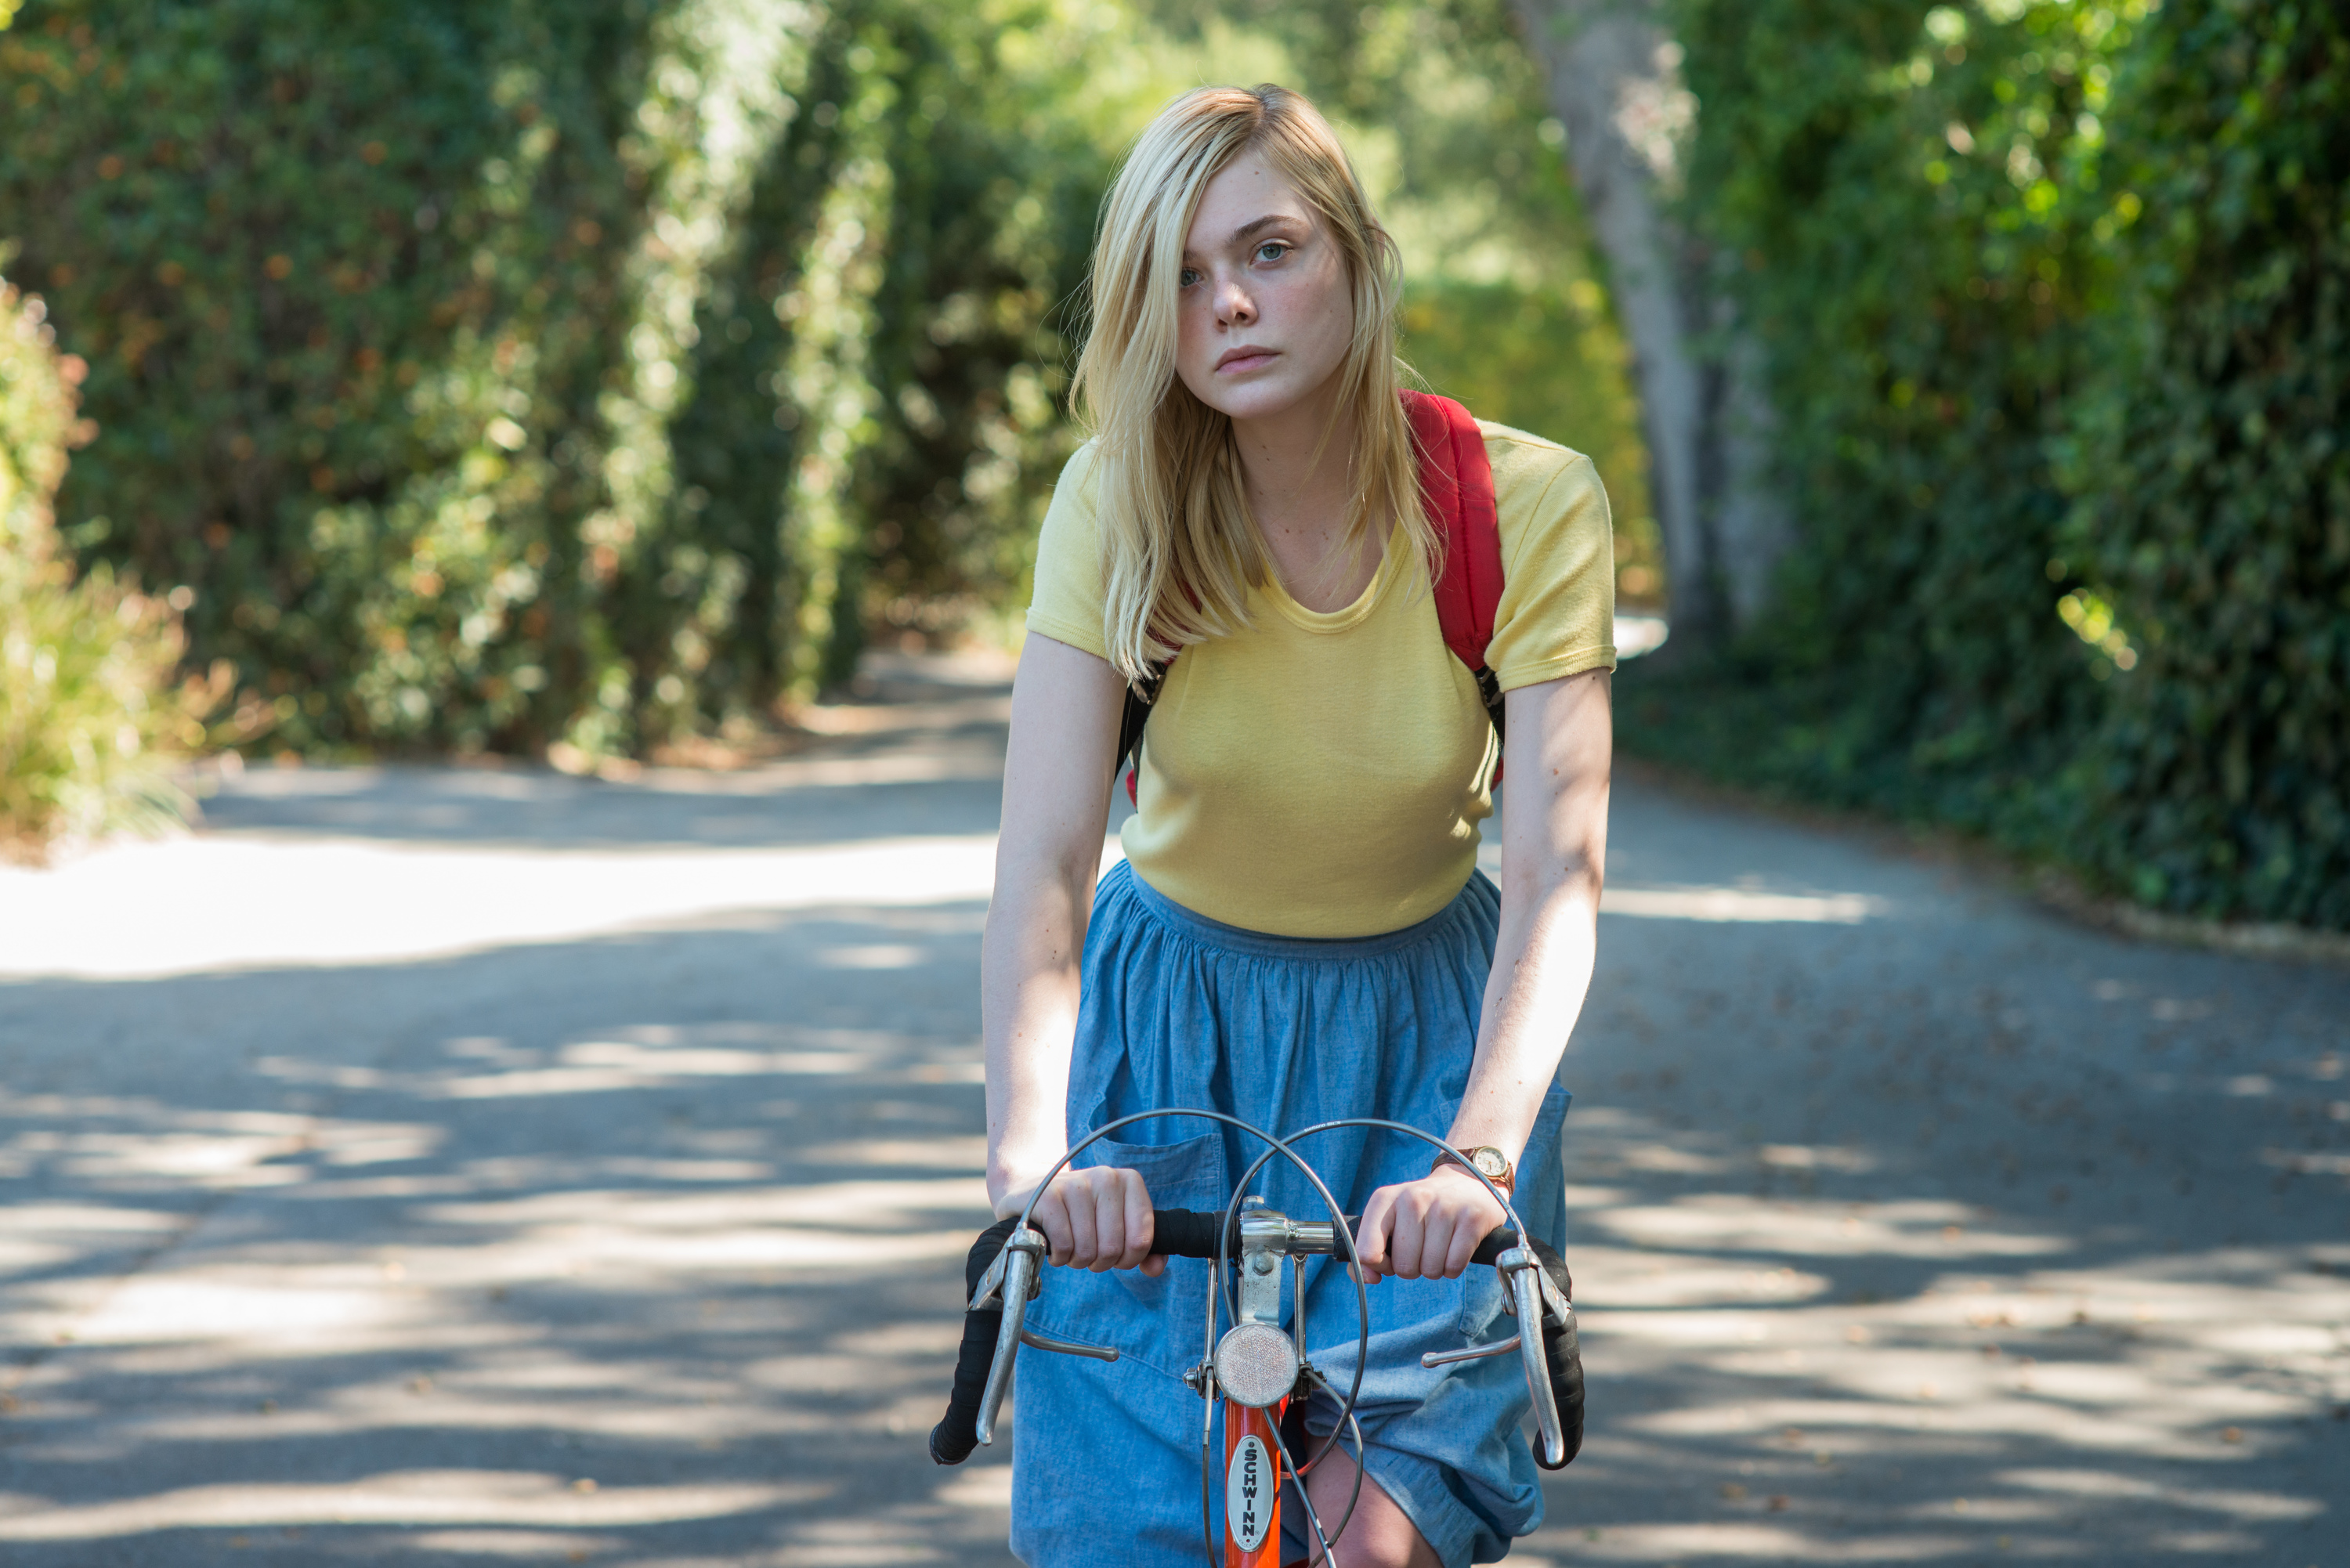 20th Century Women 2016 Directed By Mike Mills Film Review